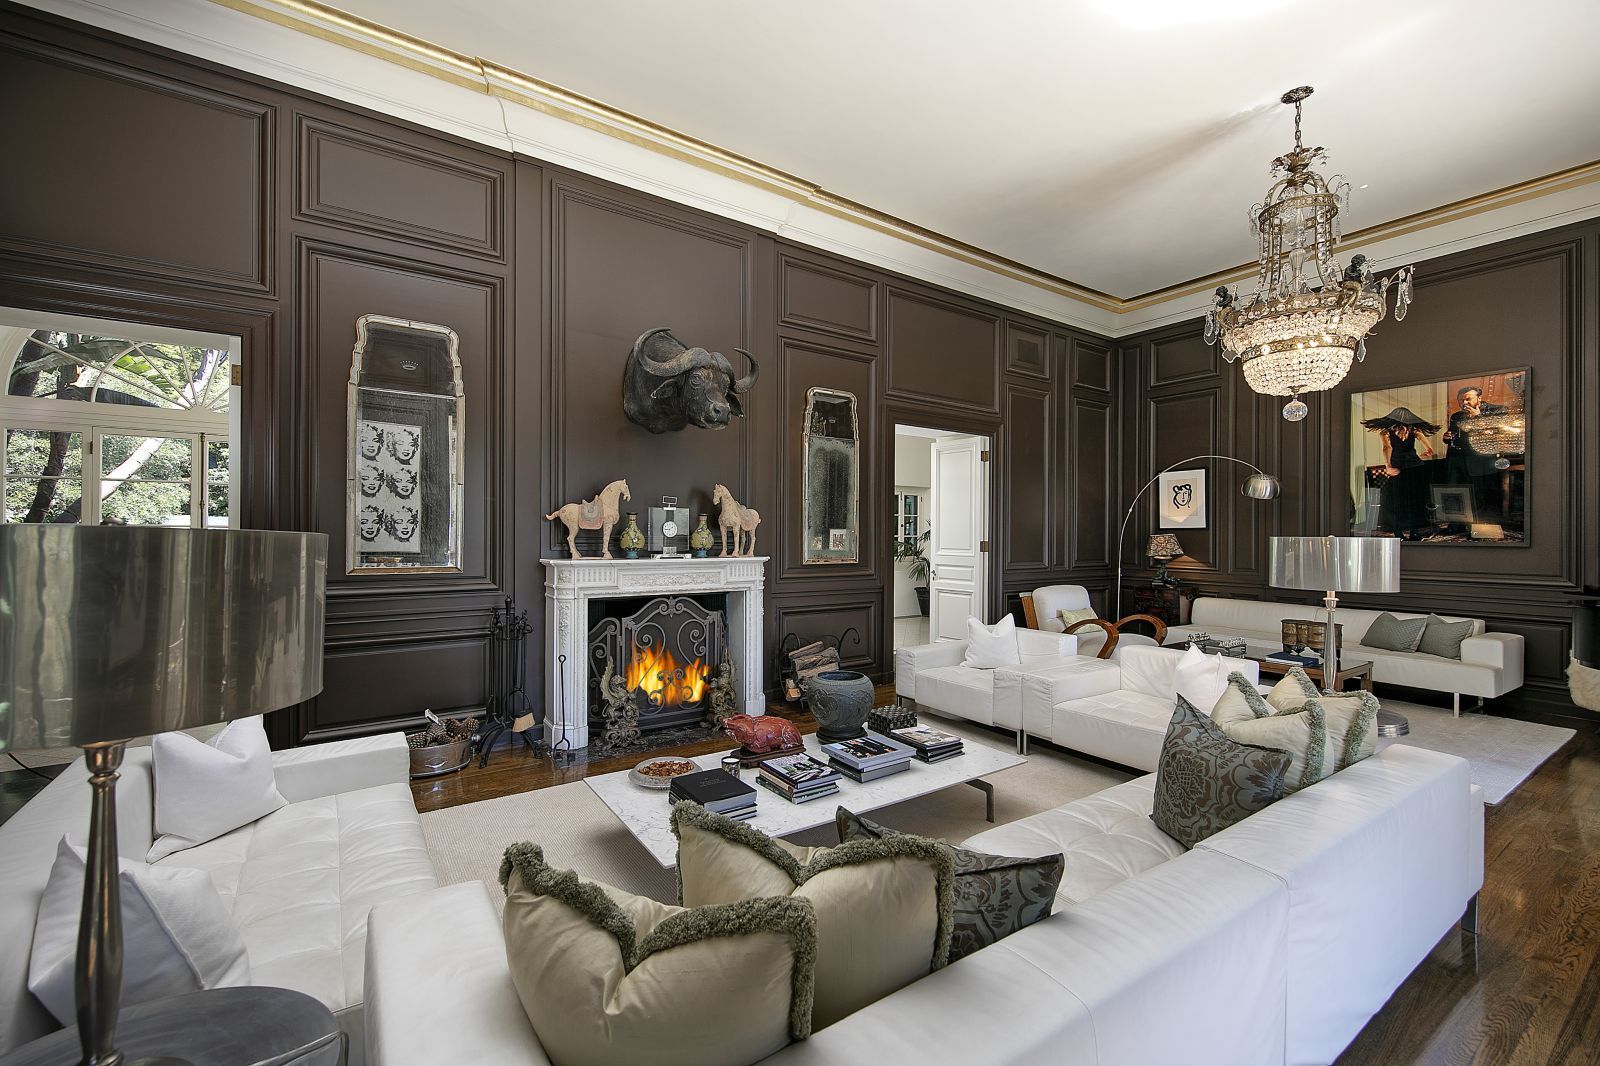 The wood paneled living room of a historic, luxury estate in Montecito.